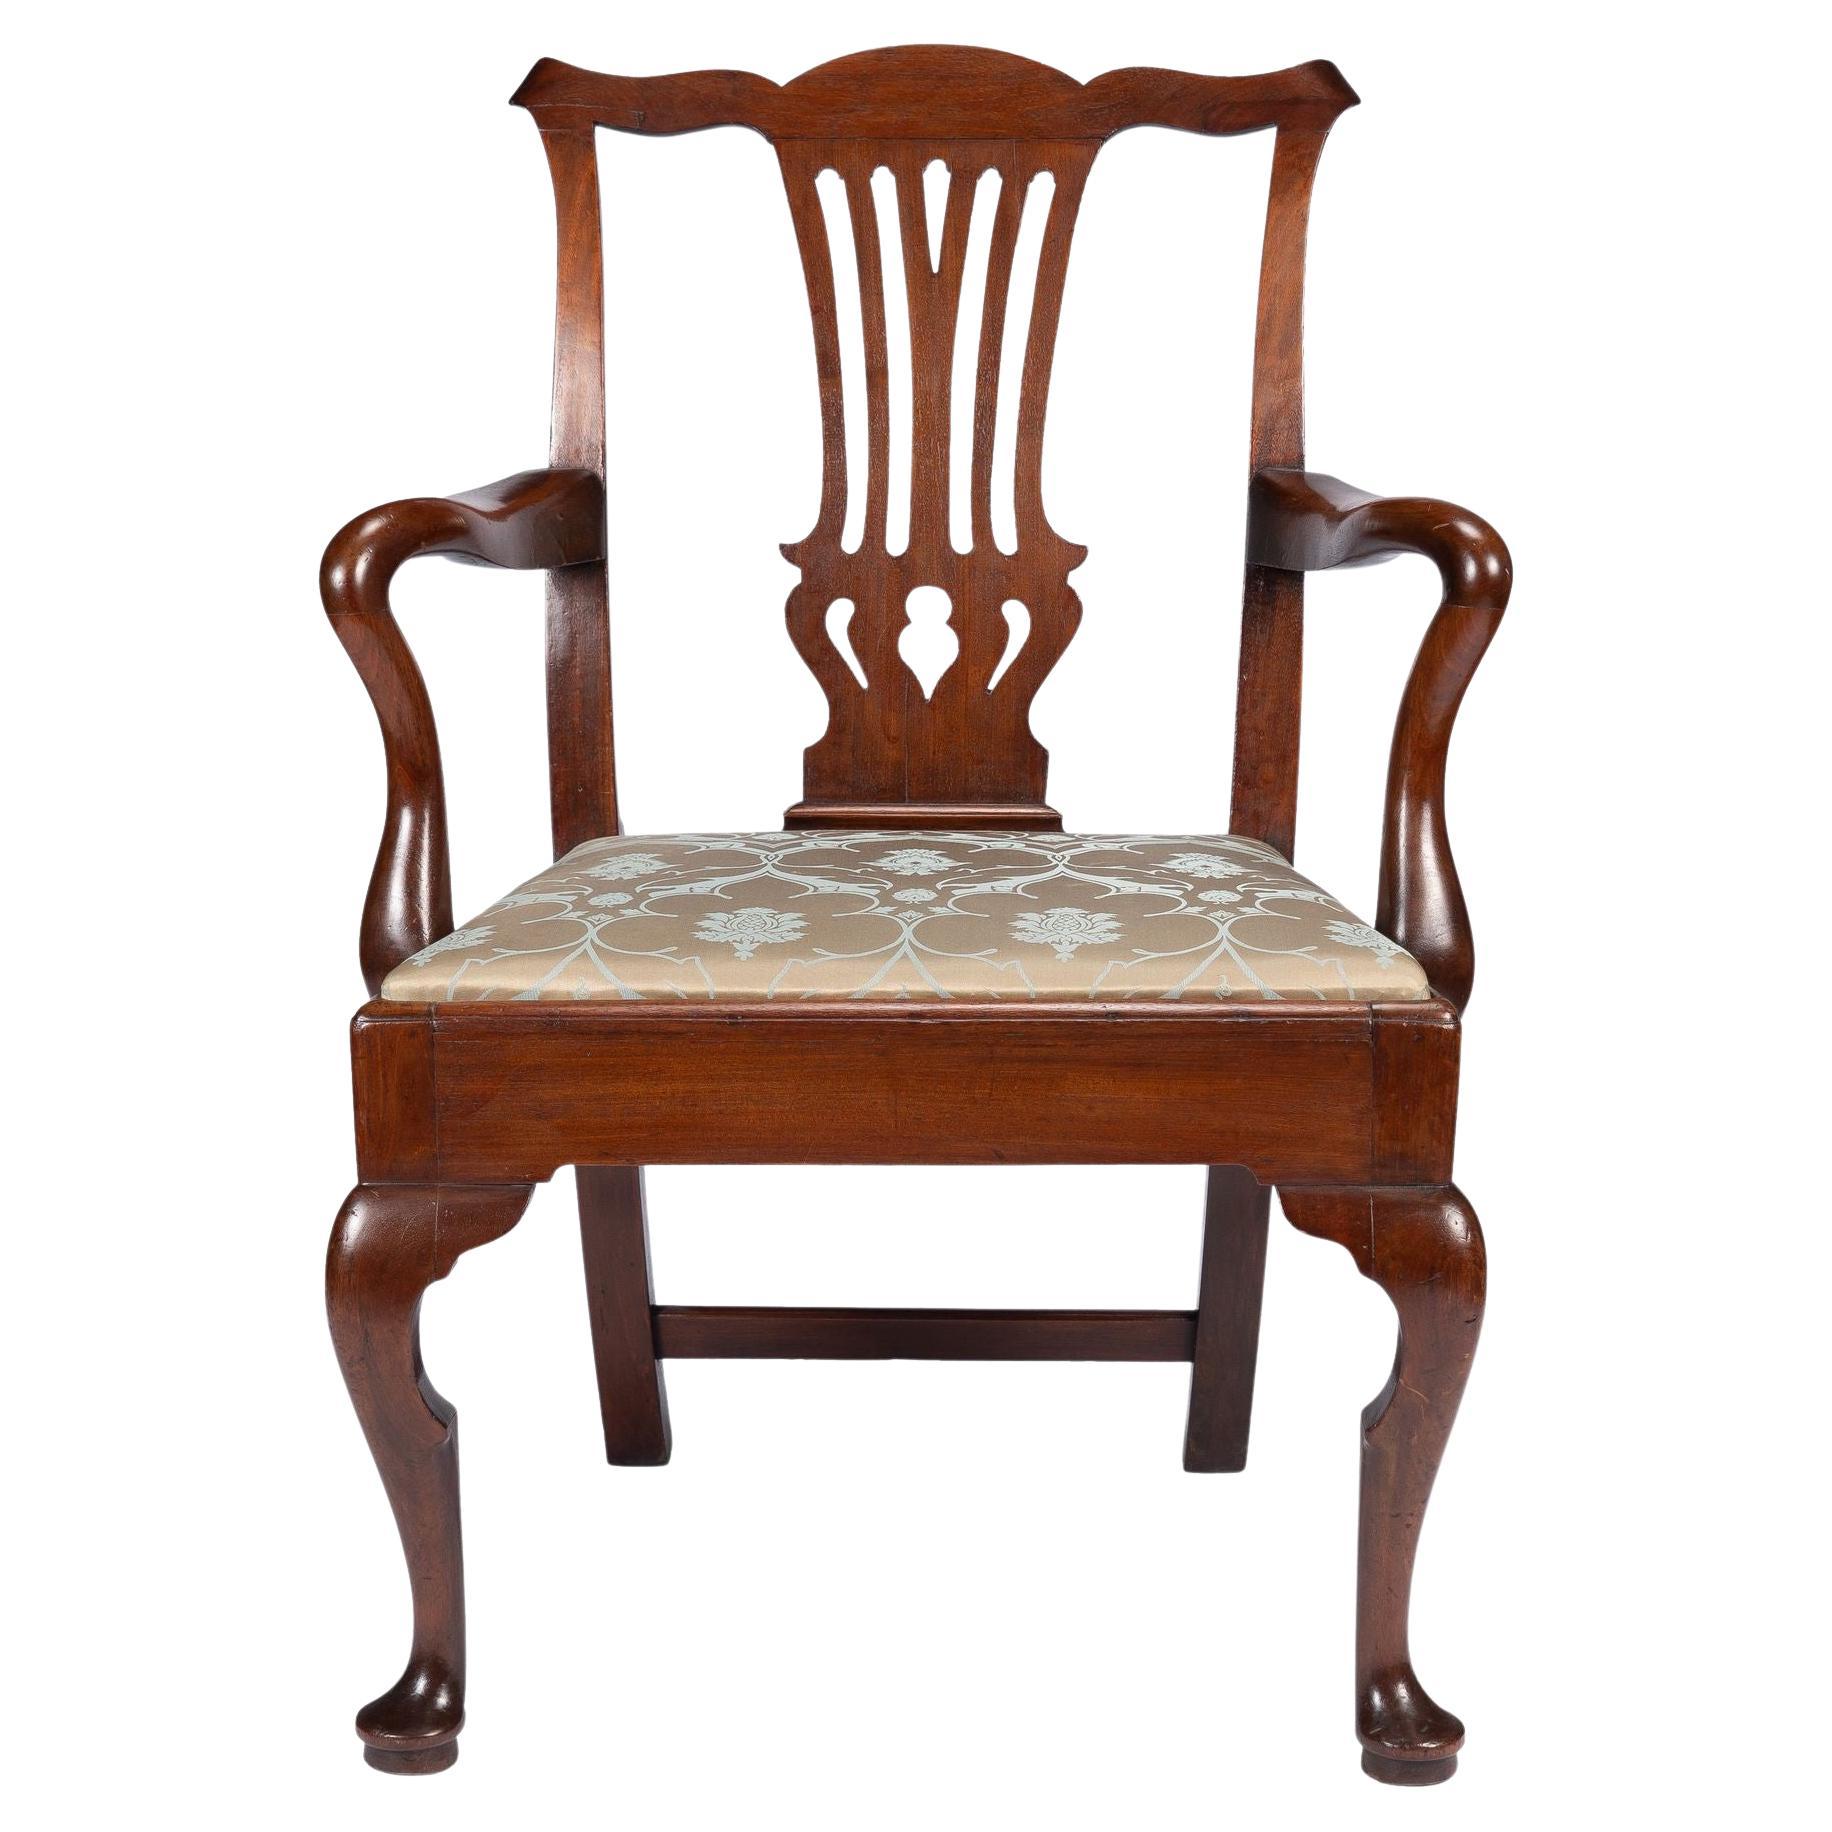 English George II Walnut Armchair with Upholstered Slip Seat, c. 1740